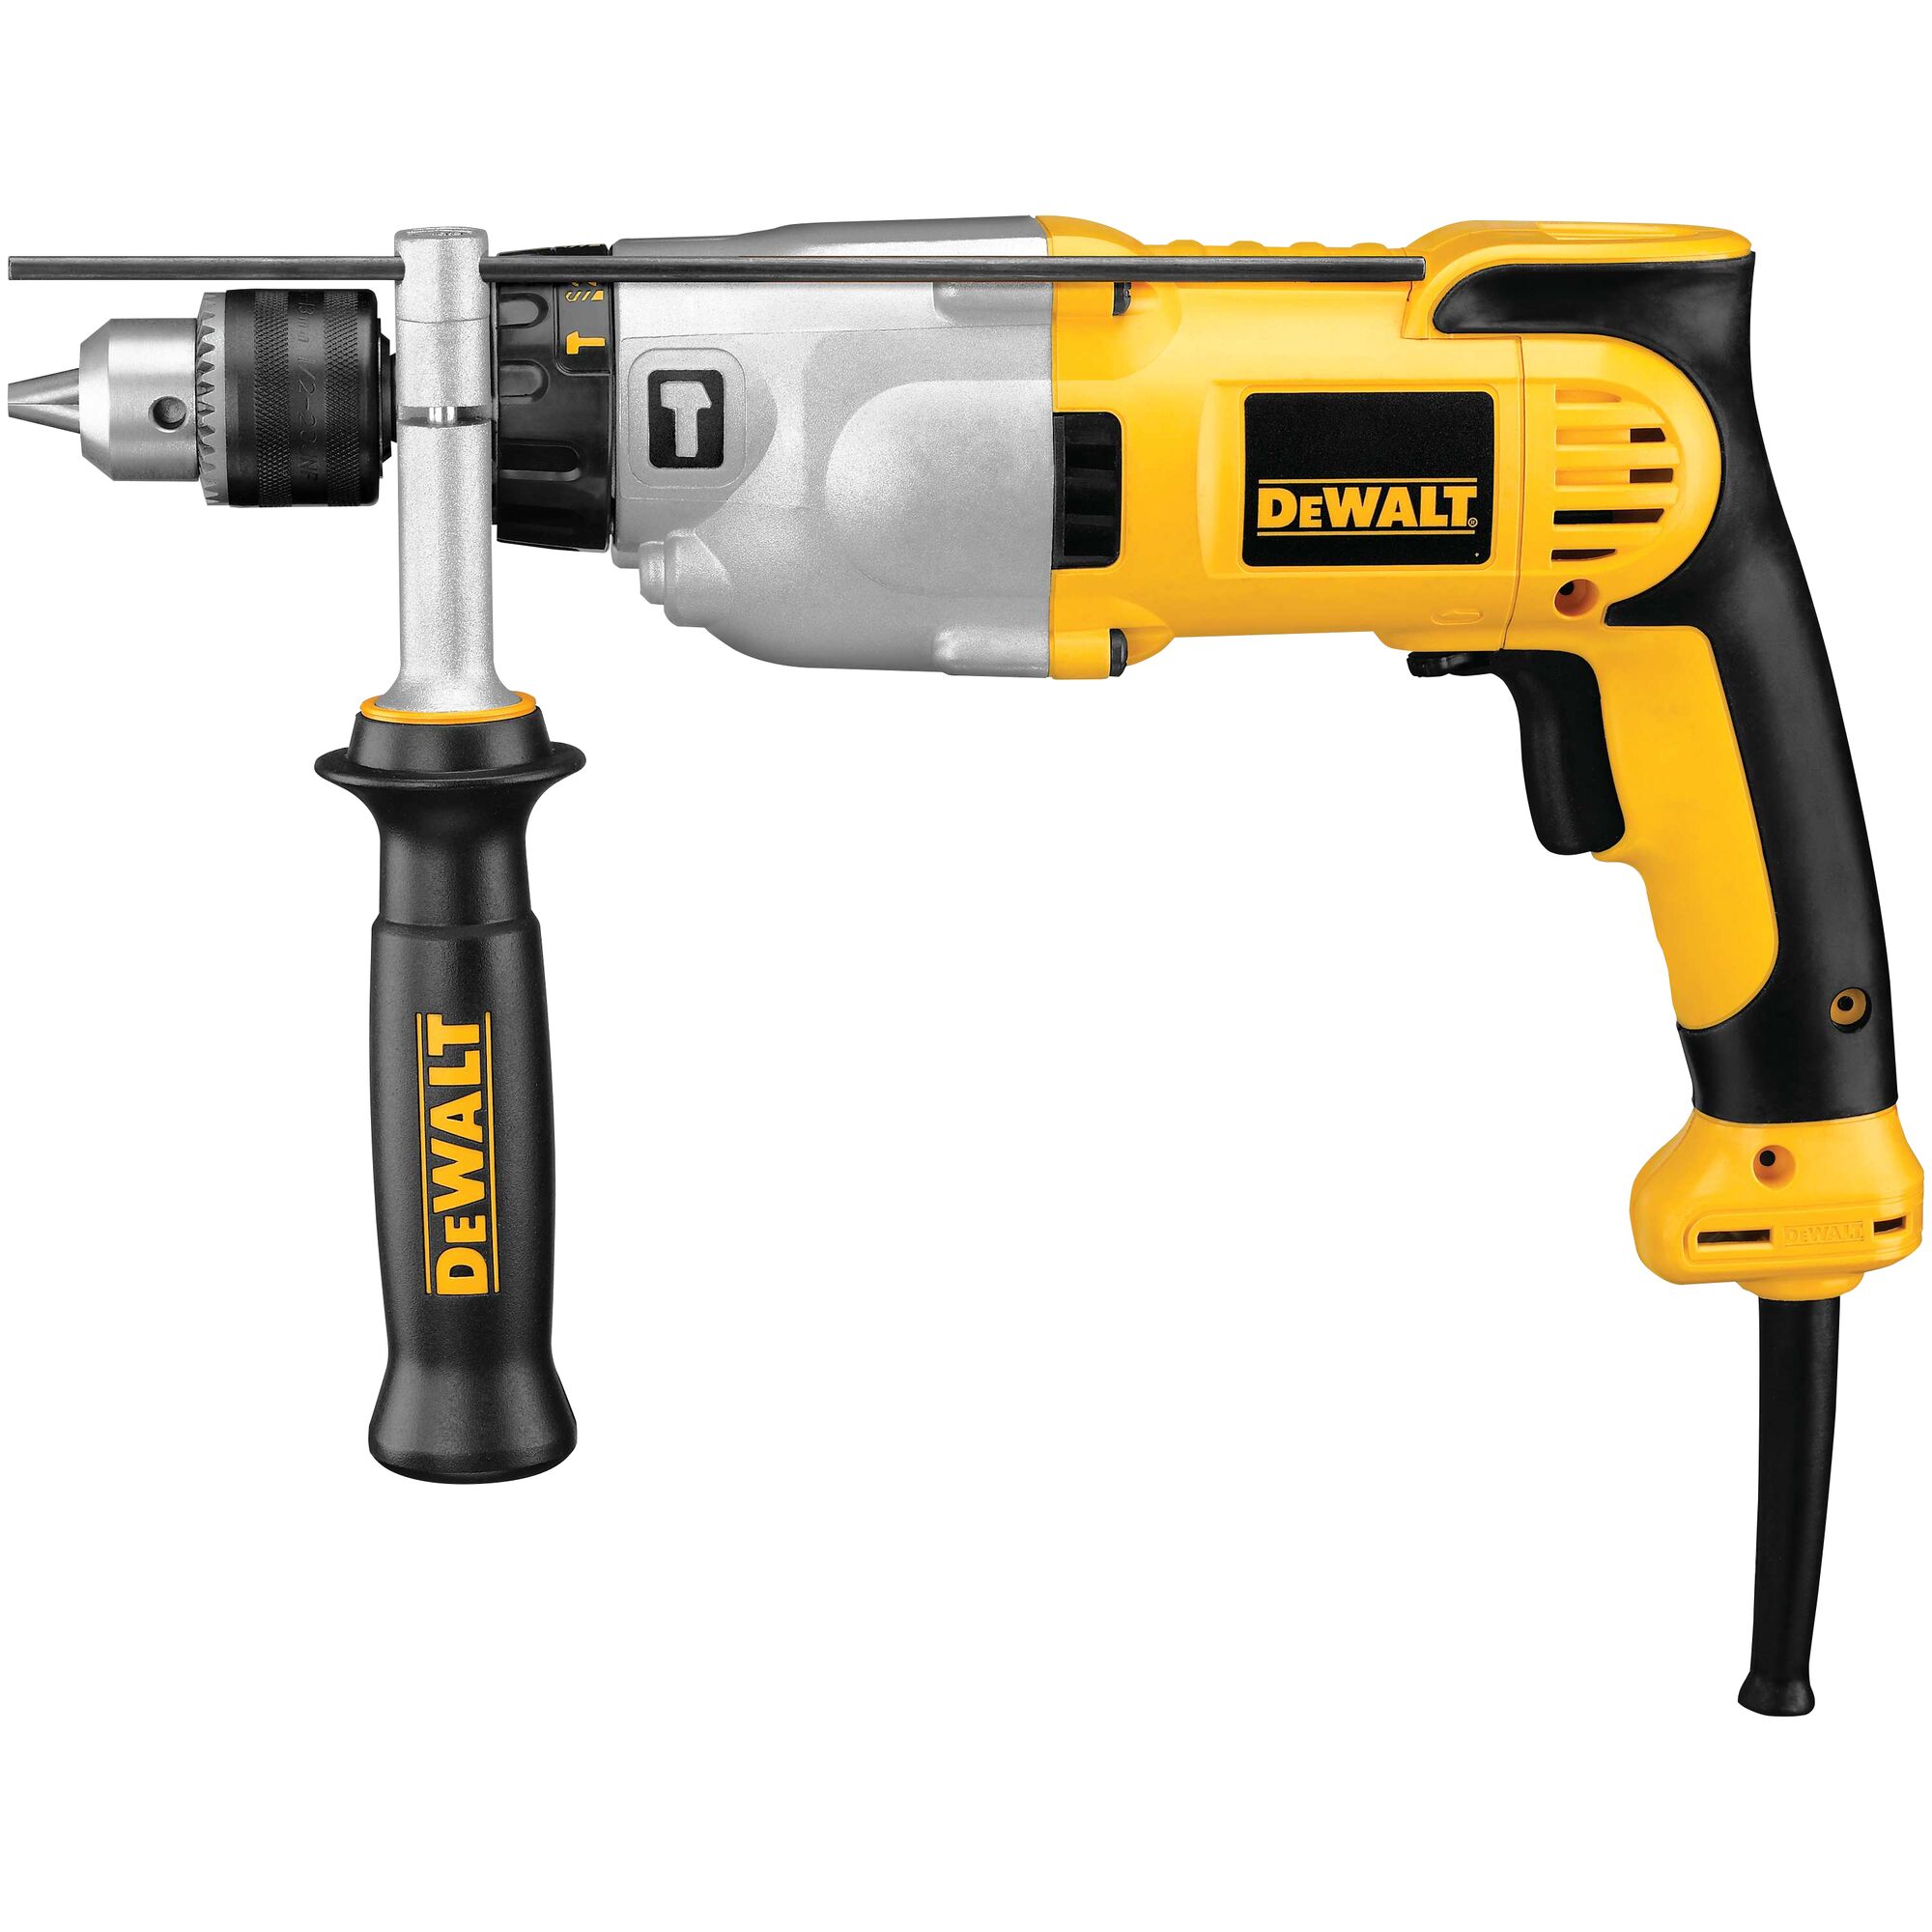 DEWALT Corded 1/2" 13mm Hammer Drill DW511 With Handle and Key for sale online 